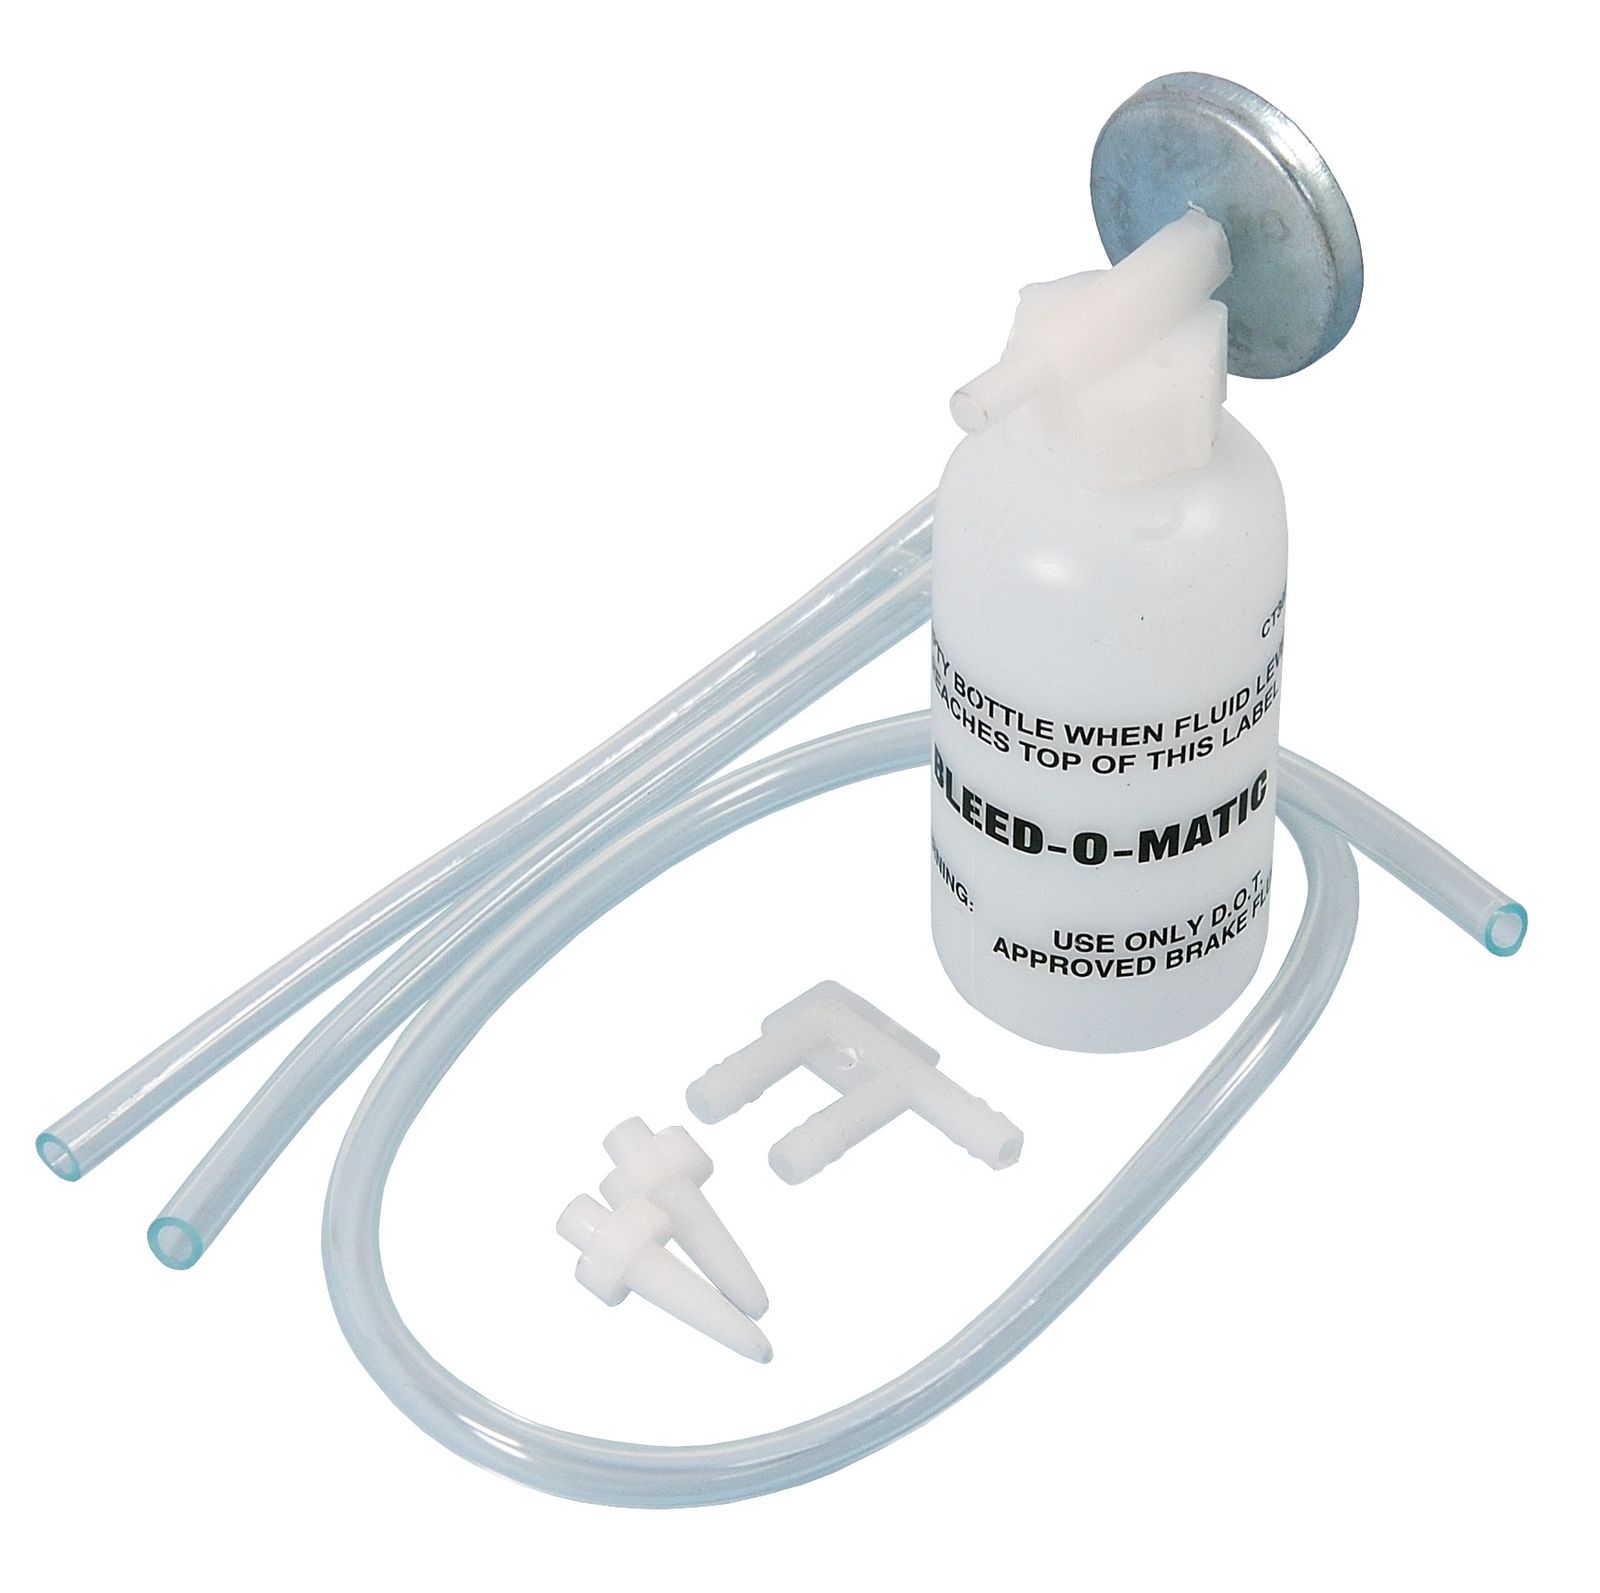 Brake Bleeder Kit 3 Adapters And Hoses With Magnetic Pad & Bottle